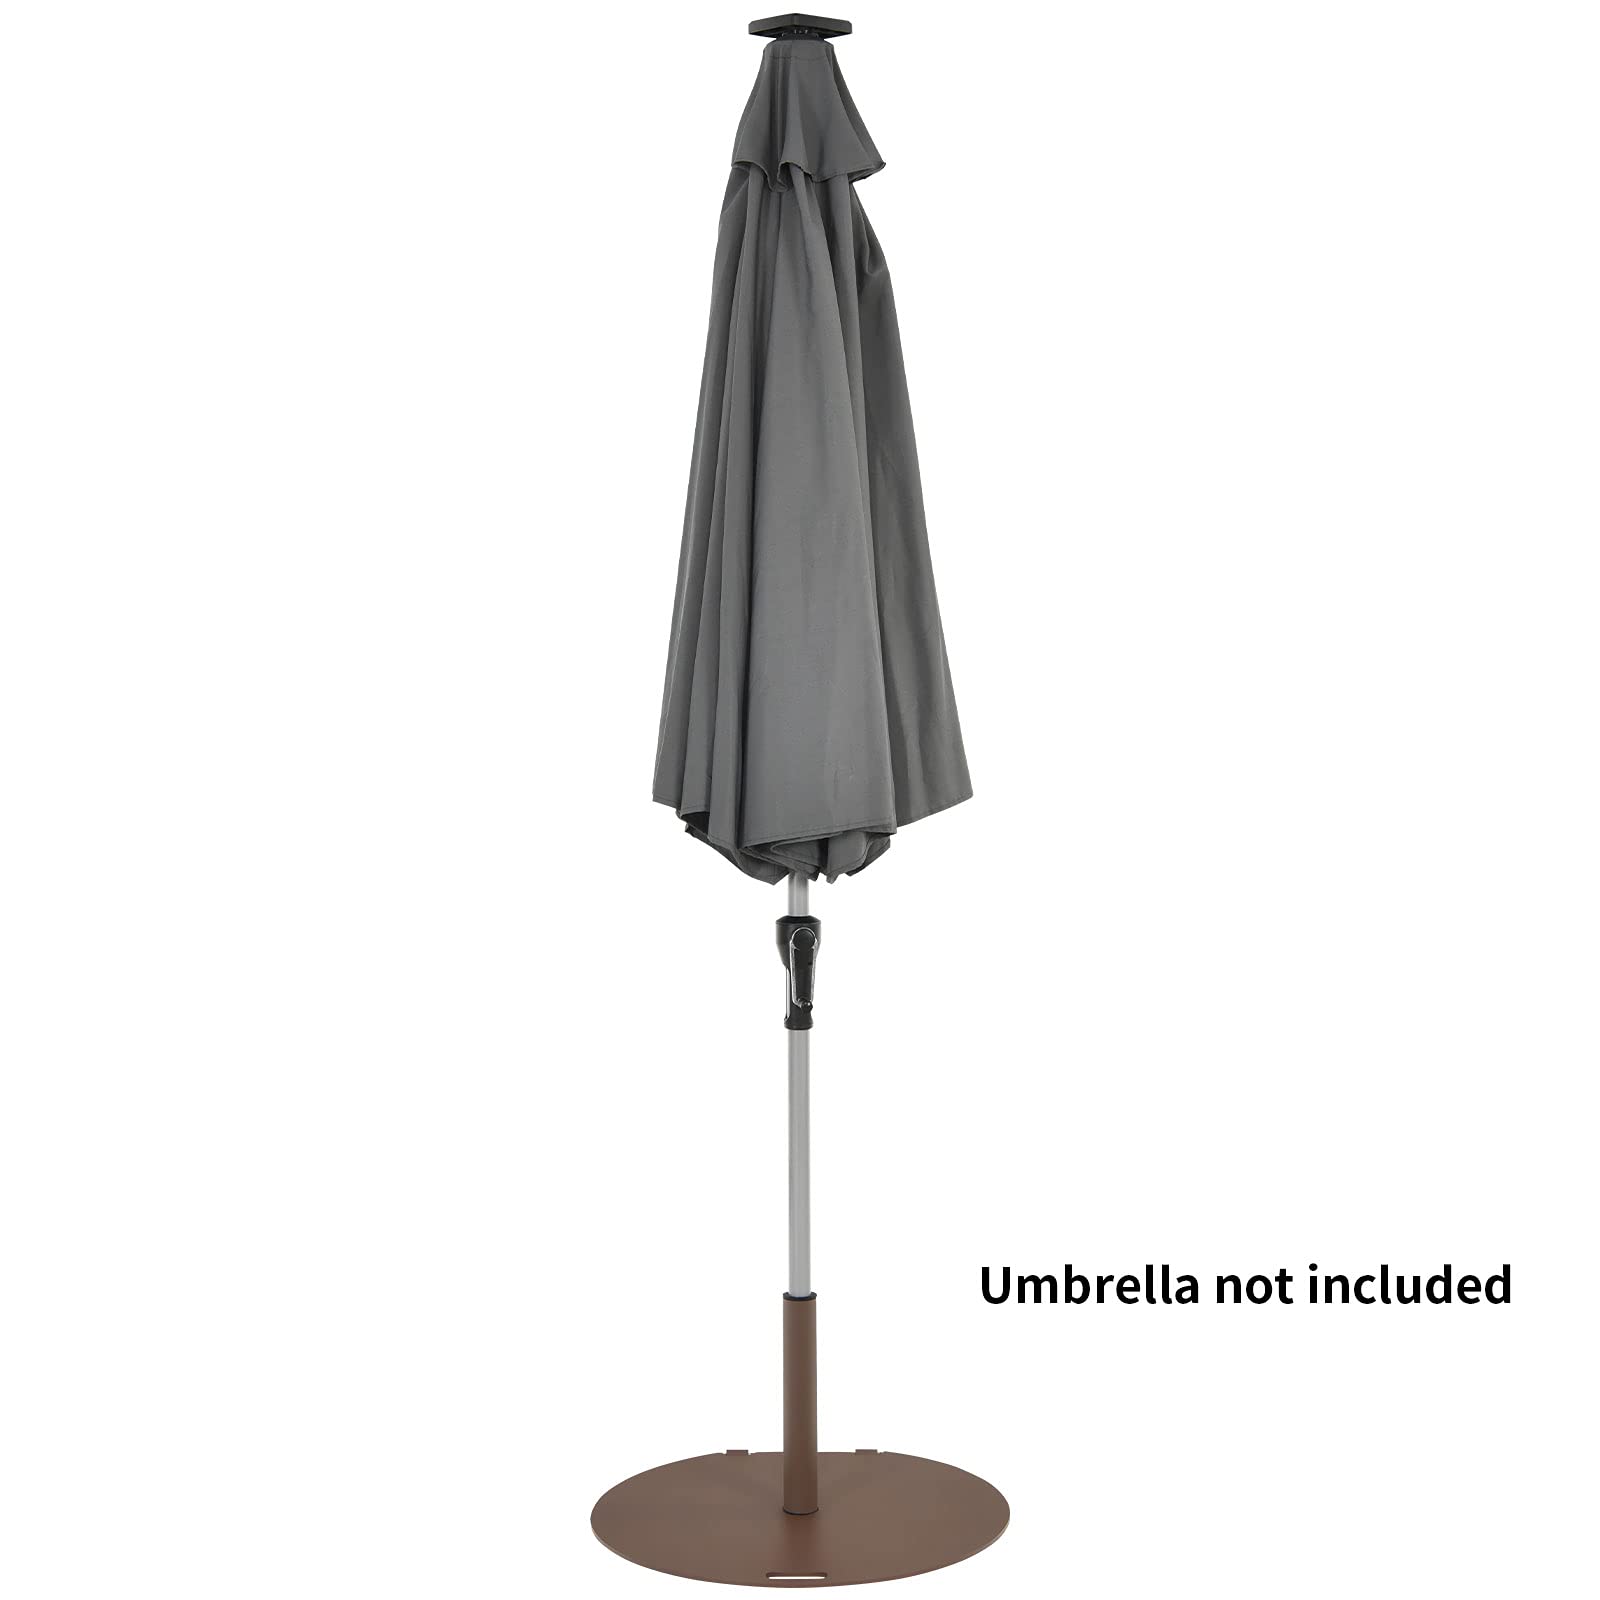 Tangkula 50LBS Patio Umbrella Base, 27.5 inches Round Umbrella Stand with Wheels